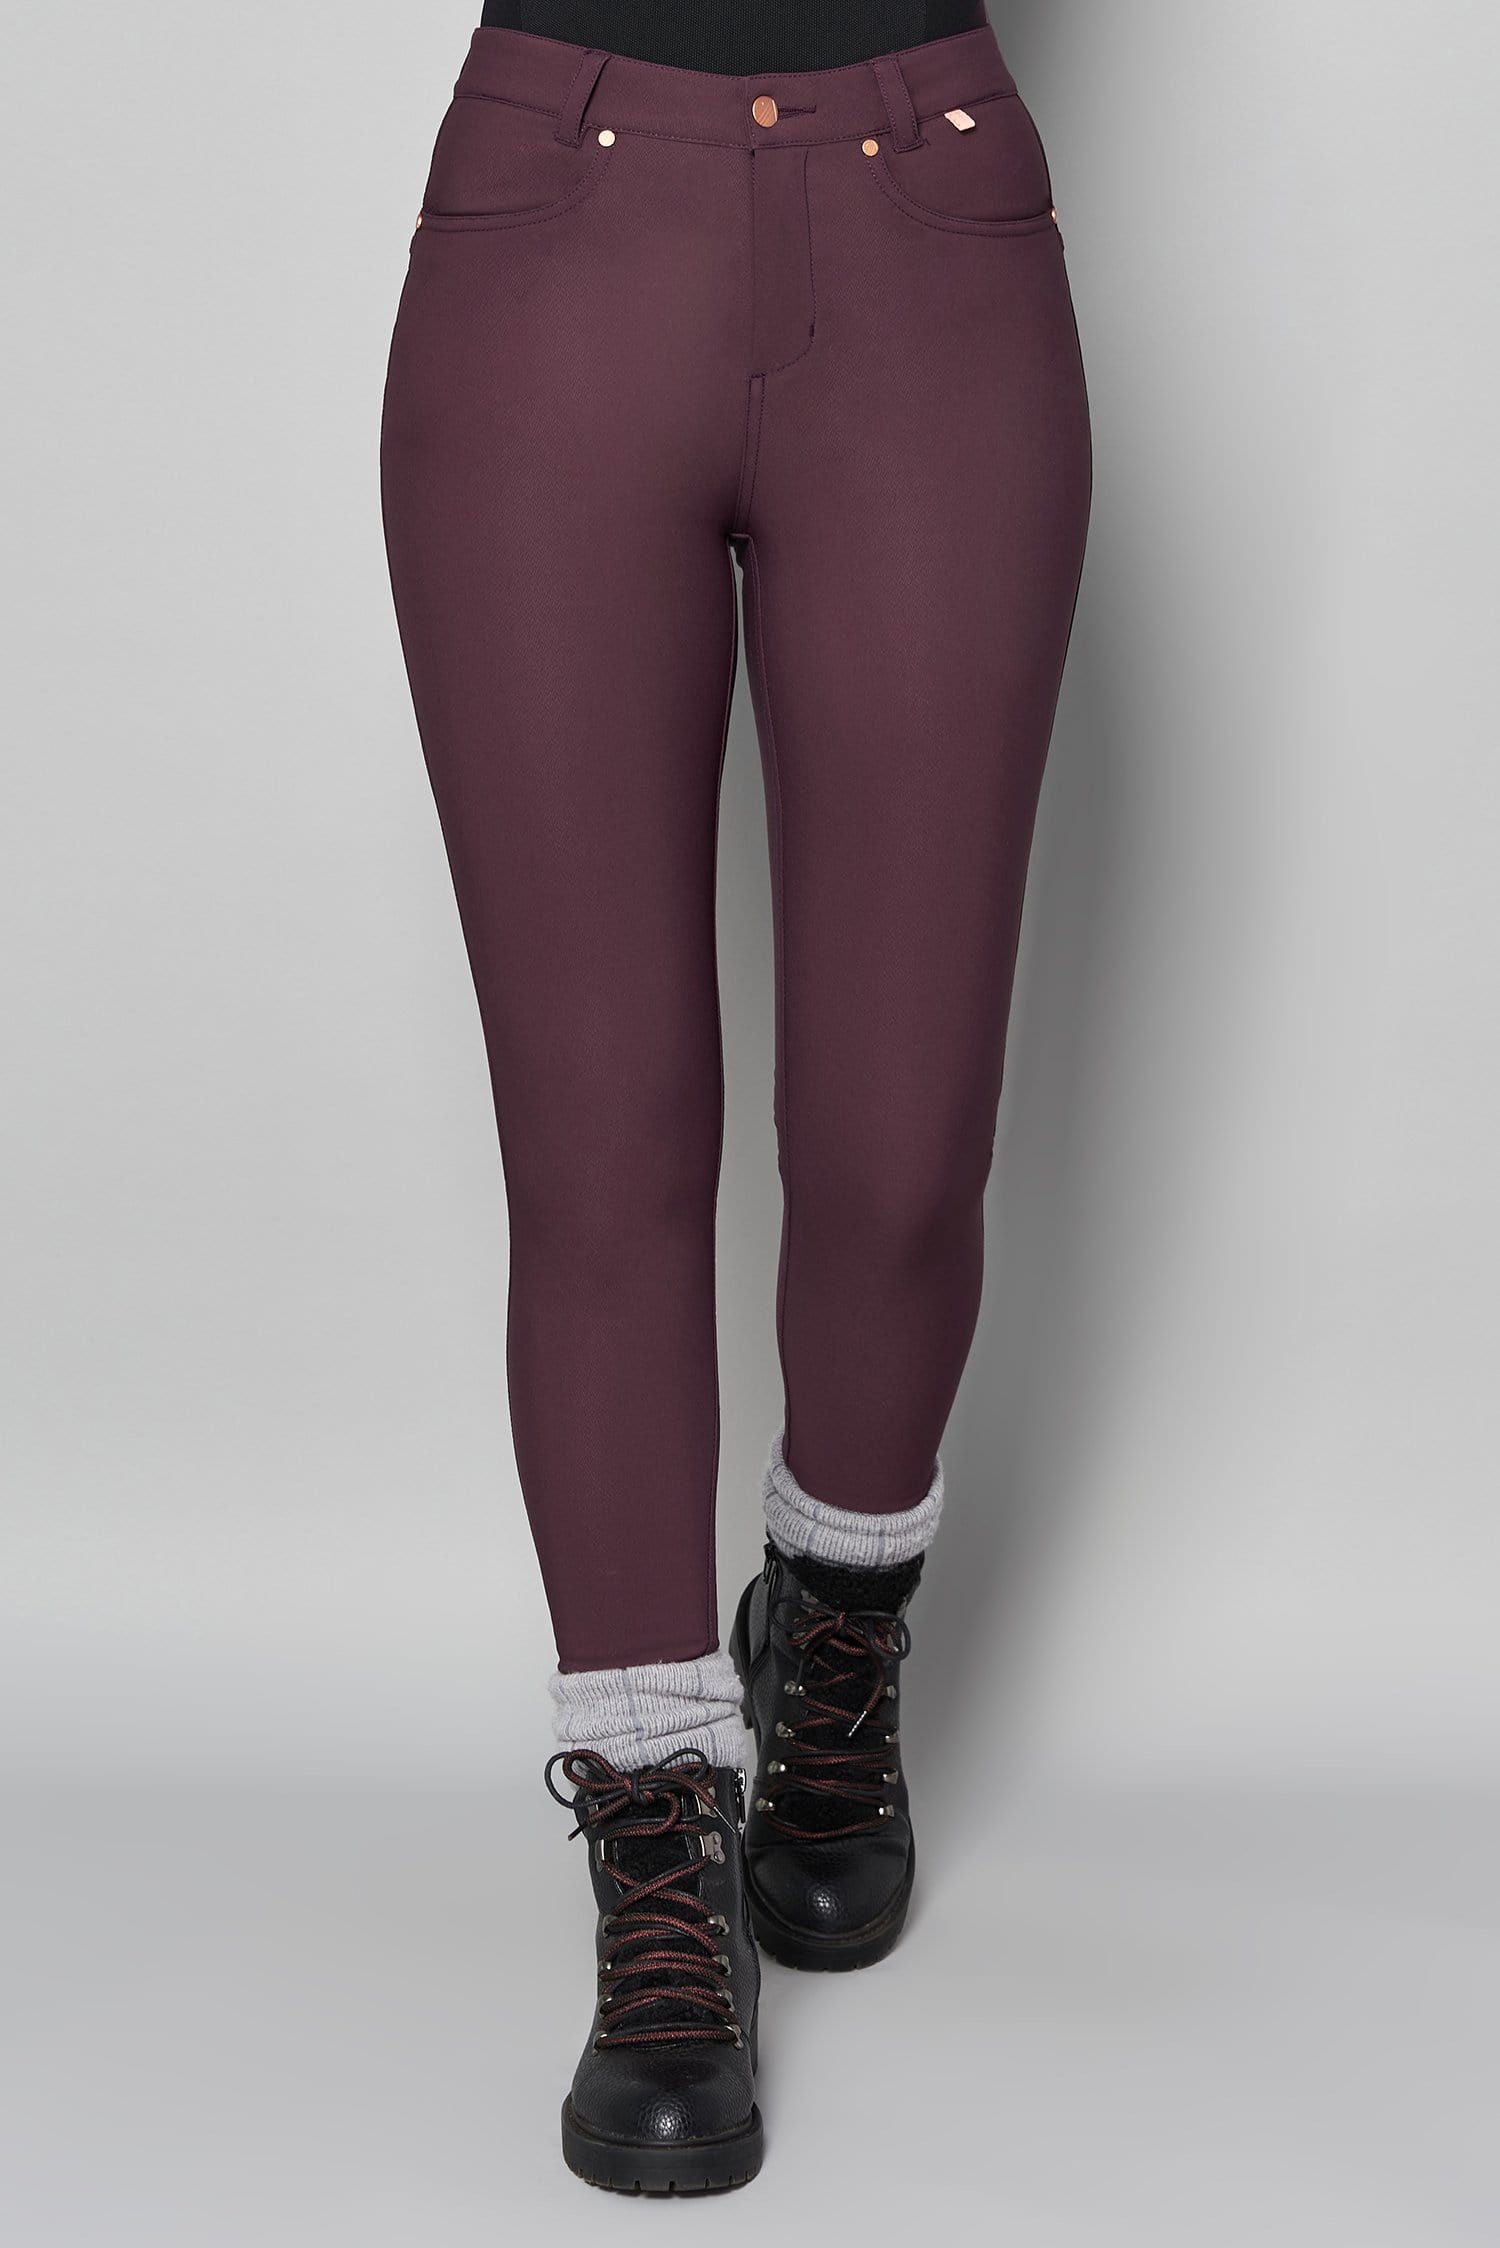 Thermal Skinny Outdoor Trousers - Aubergine - 34r / Uk16 - Womens - Acai Outdoorwear